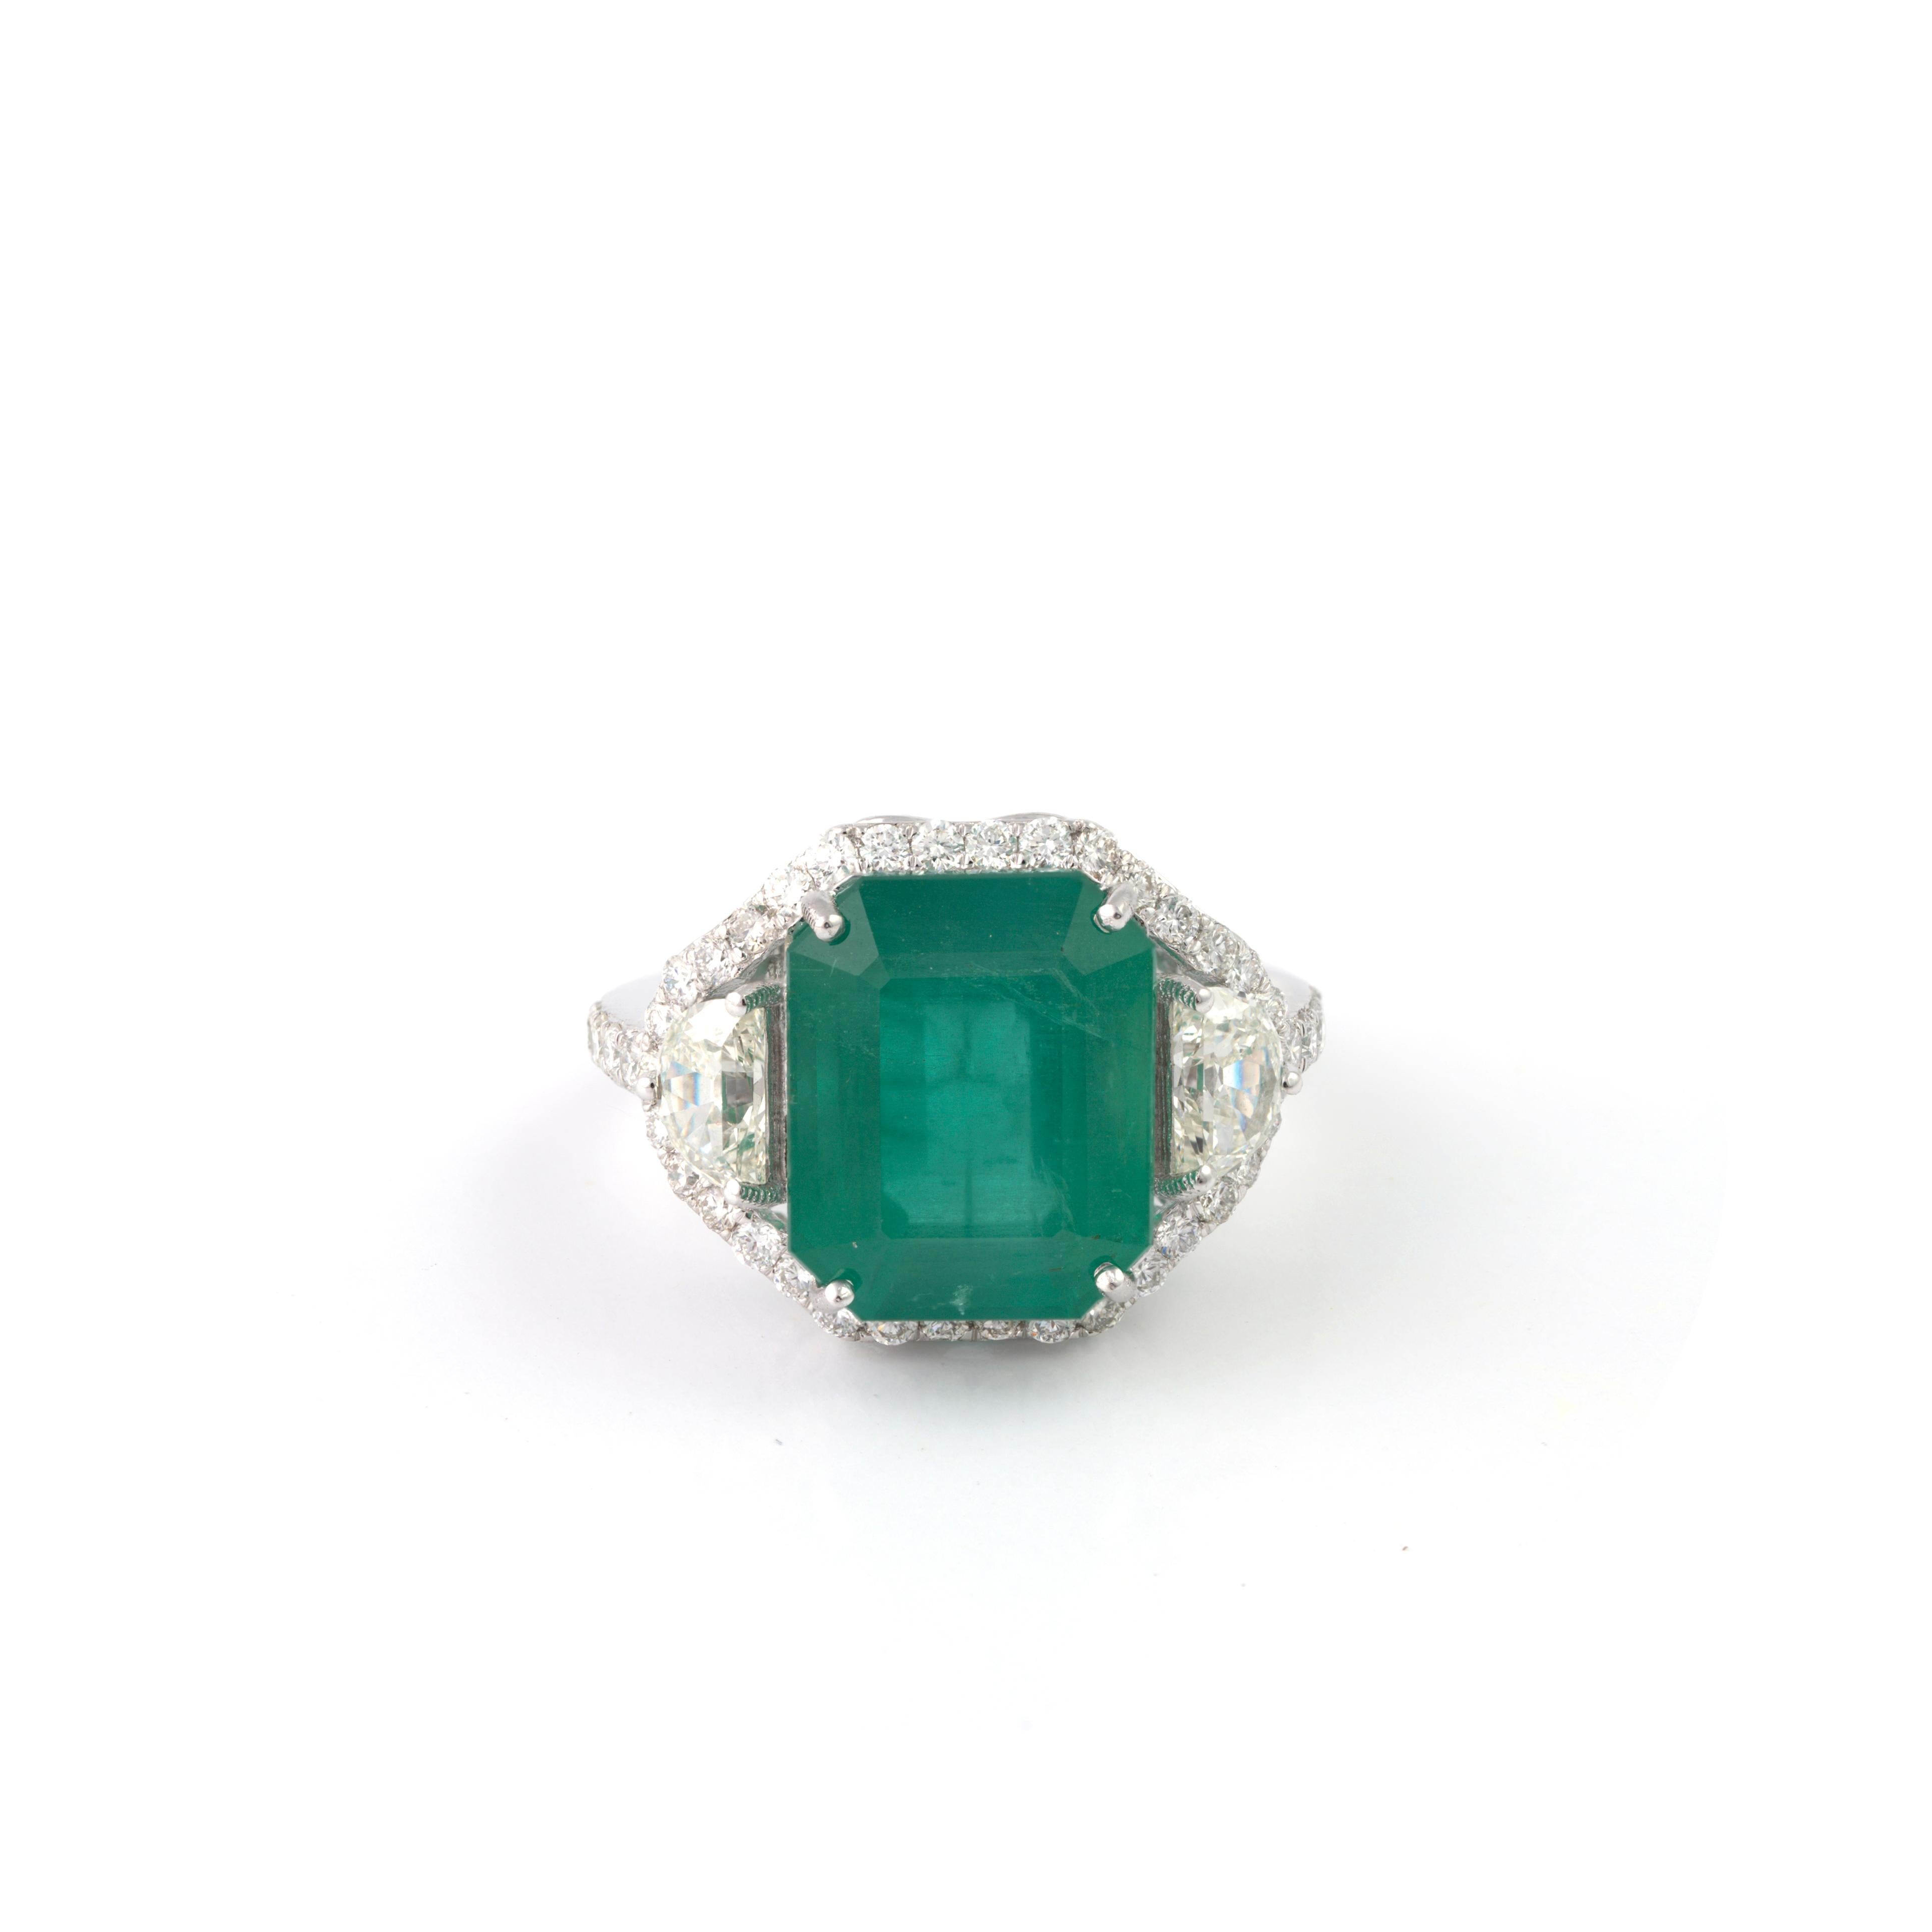 Natural Zambian Emerald 9.24 Carats and Diamonds Half Moon 1.01 Carats in 14k For Sale 1